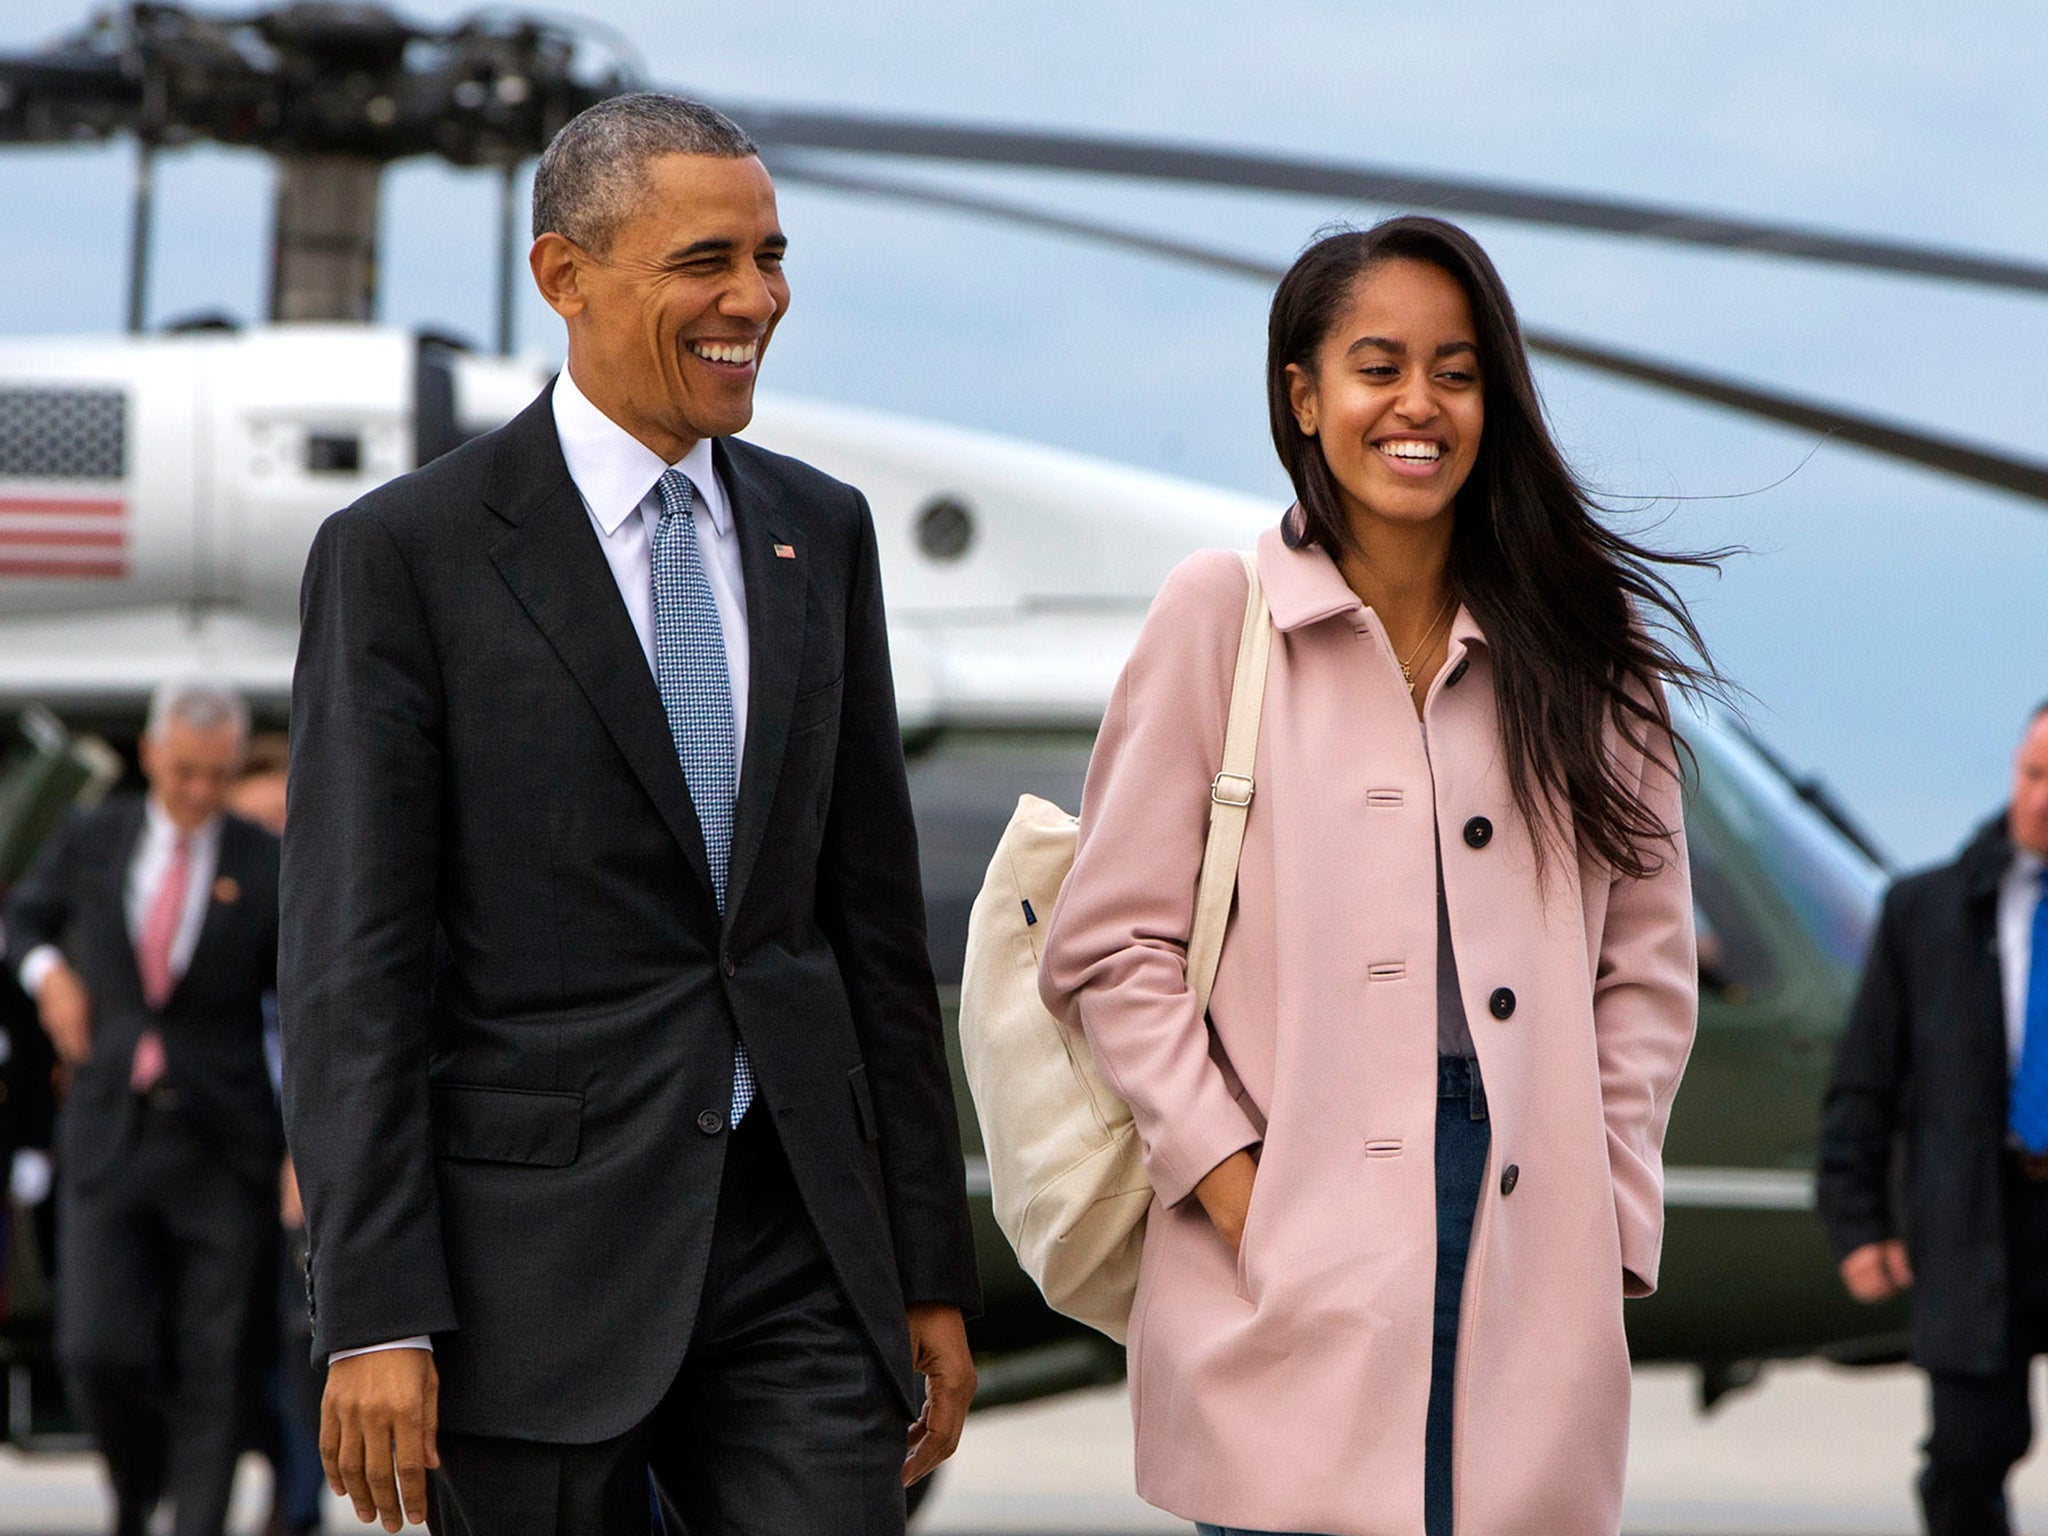 Malia Obama and her father Barack during his time in the White House